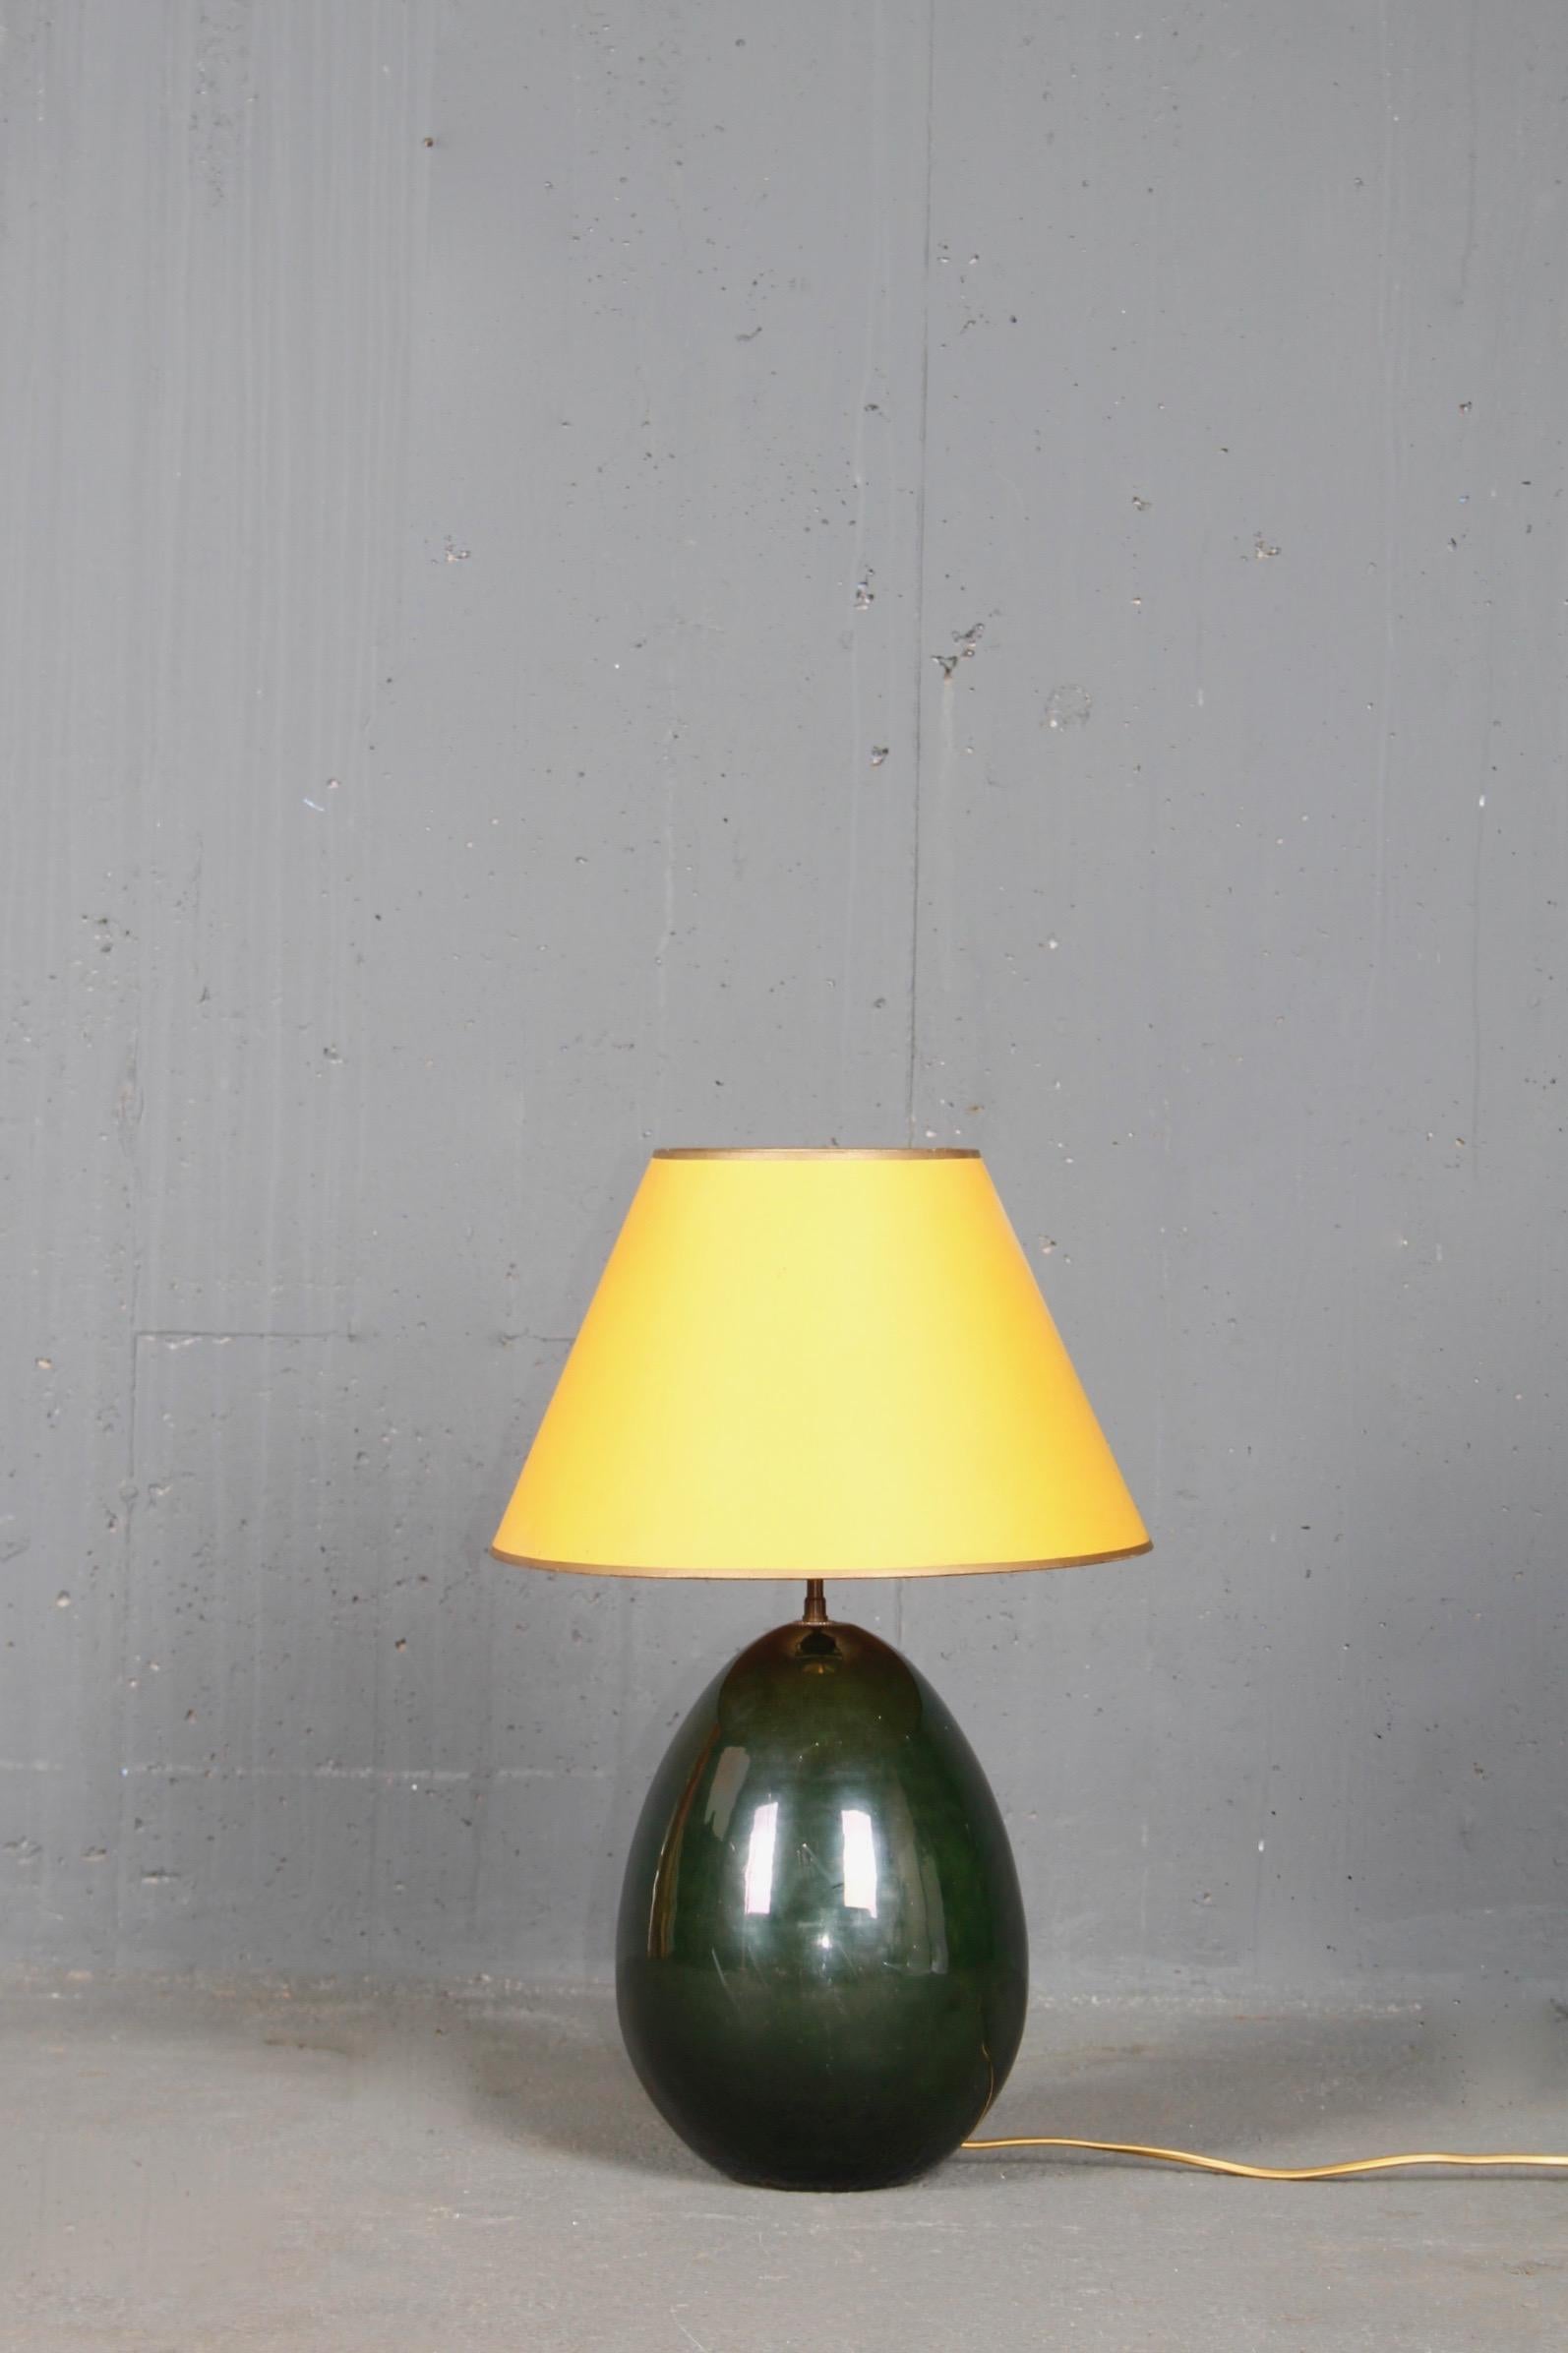 Italian ceramic table lamp, dimensions with out shade height 40 diameter 24 cm.